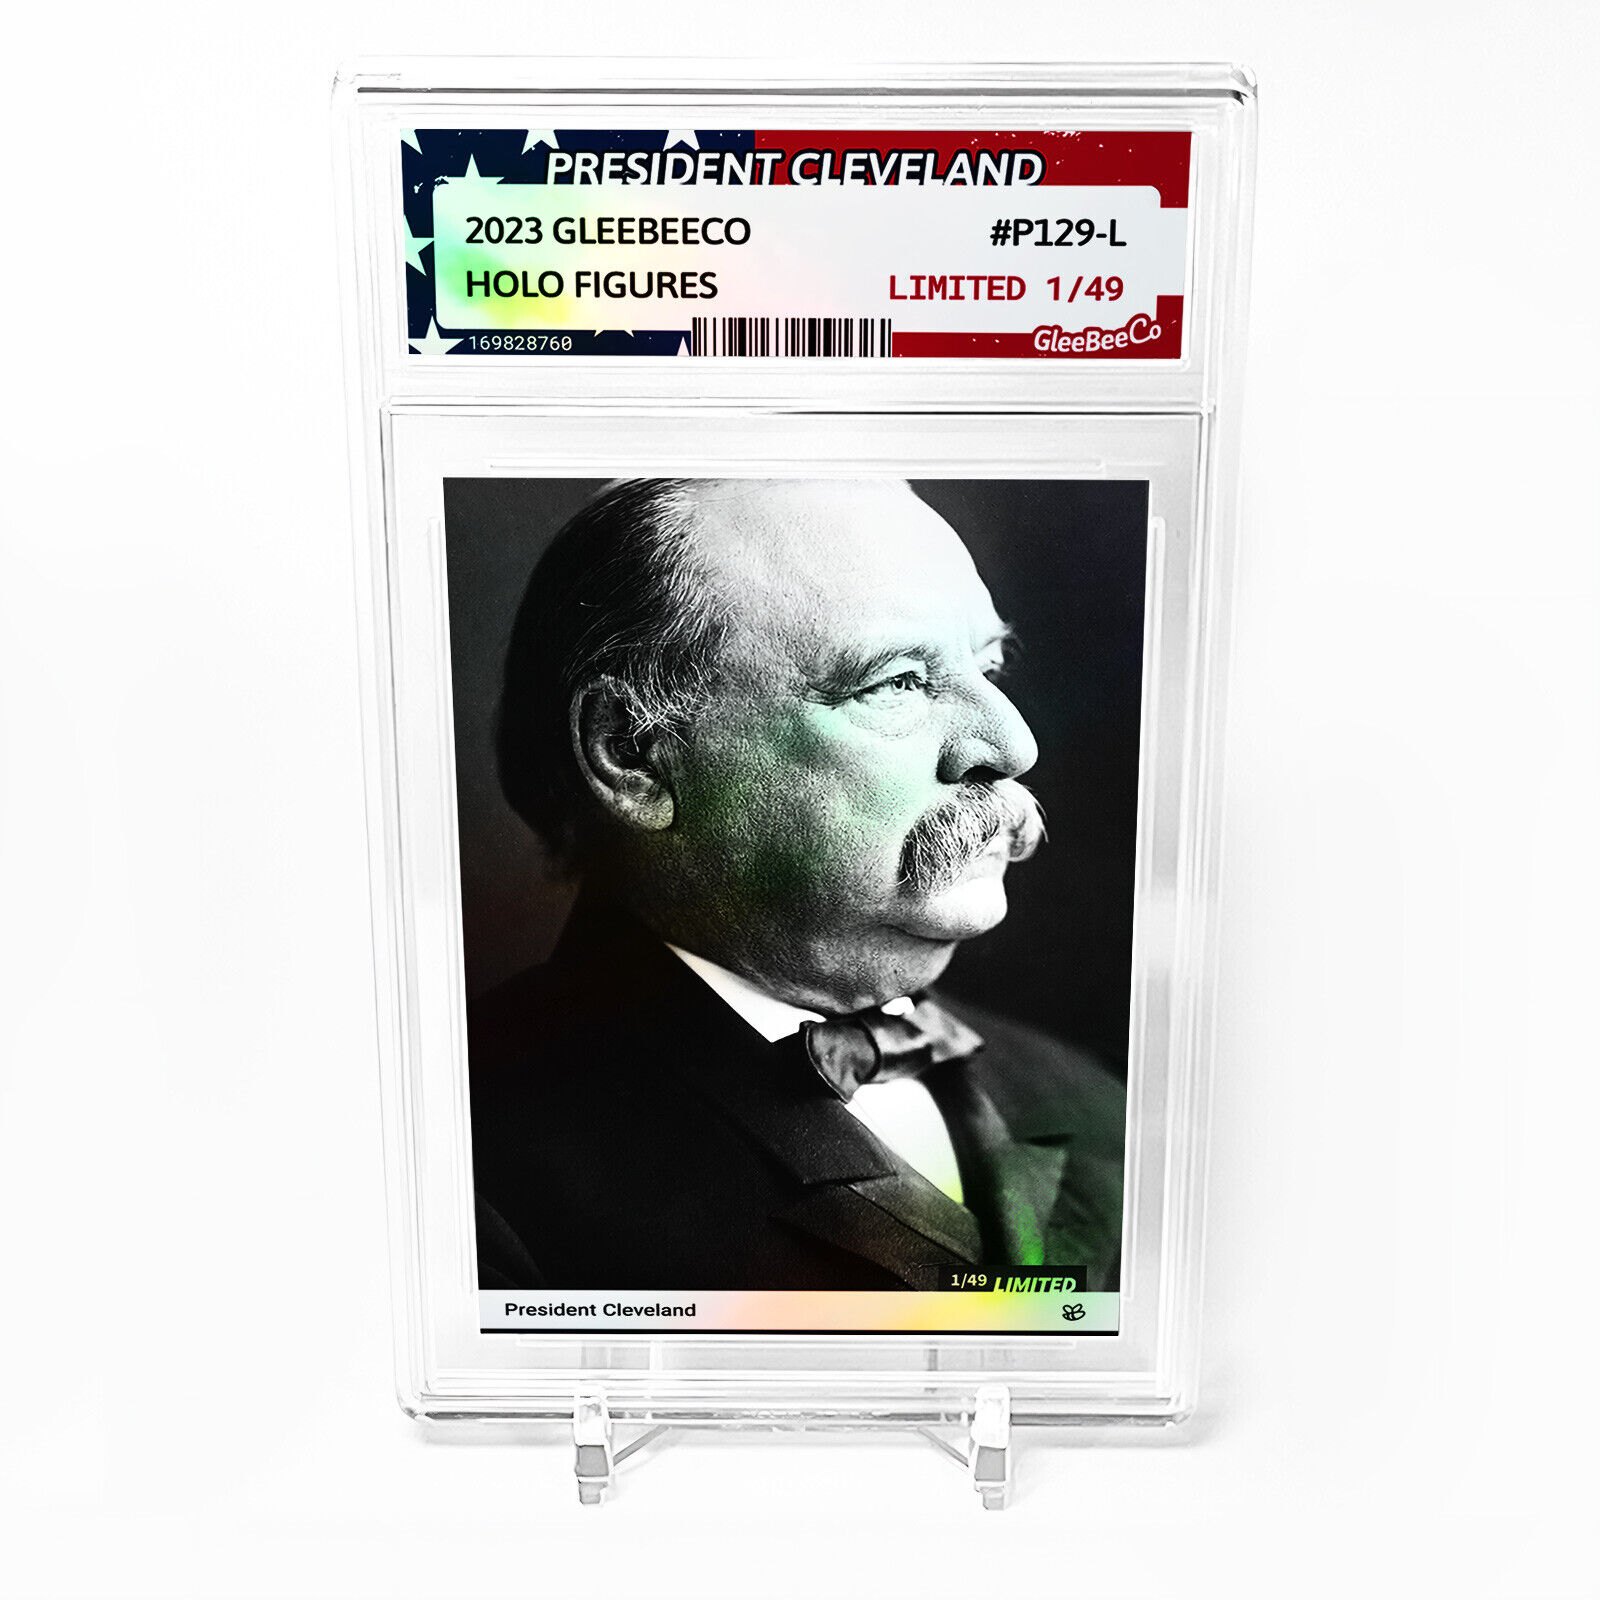 PRESIDENT CLEVELAND Card GleeBeeCo Holo Figures 1904 #P129-L Limited to Only /49